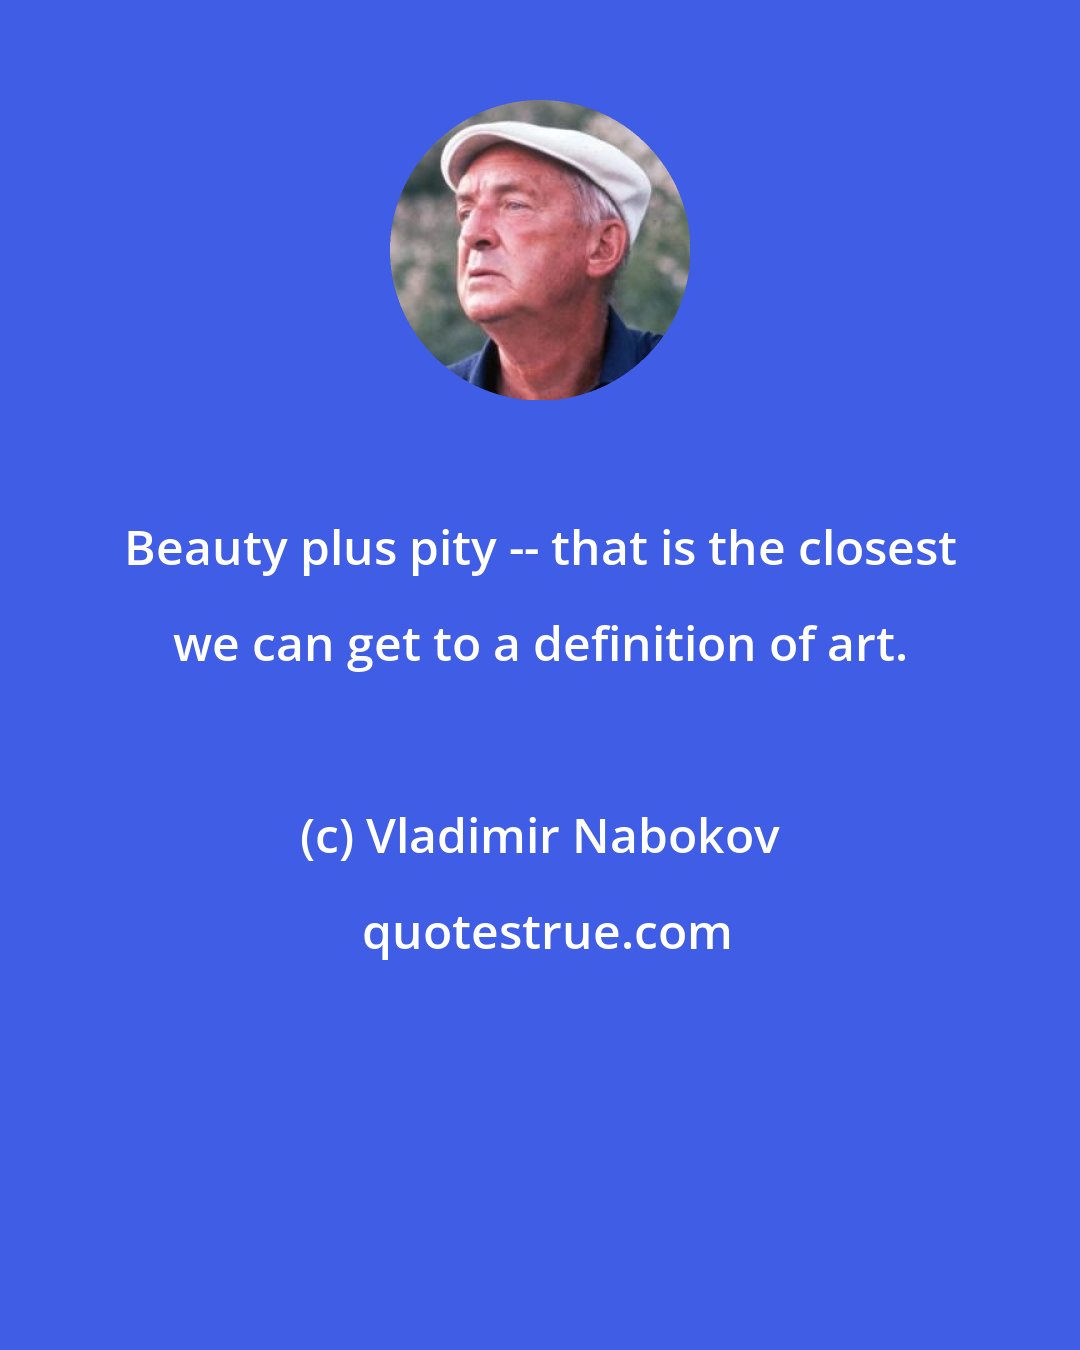 Vladimir Nabokov: Beauty plus pity -- that is the closest we can get to a definition of art.